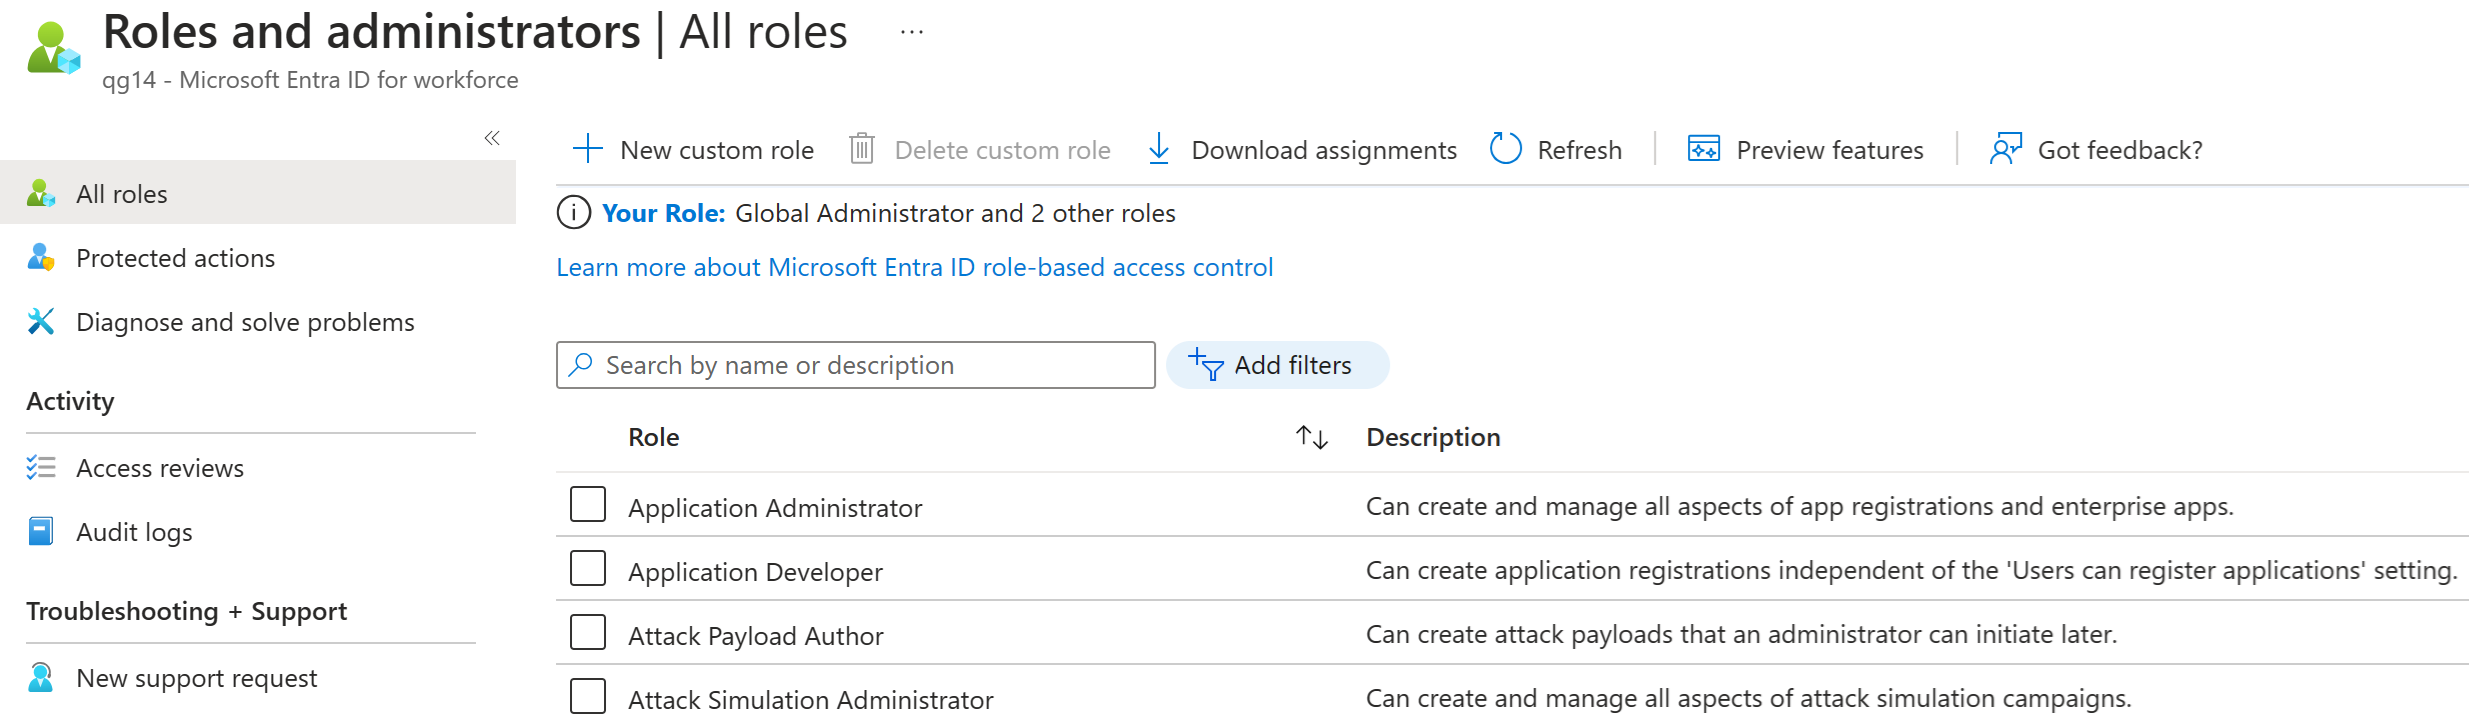 Screenshot of Create or edit custom roles from the Roles and administrators page.